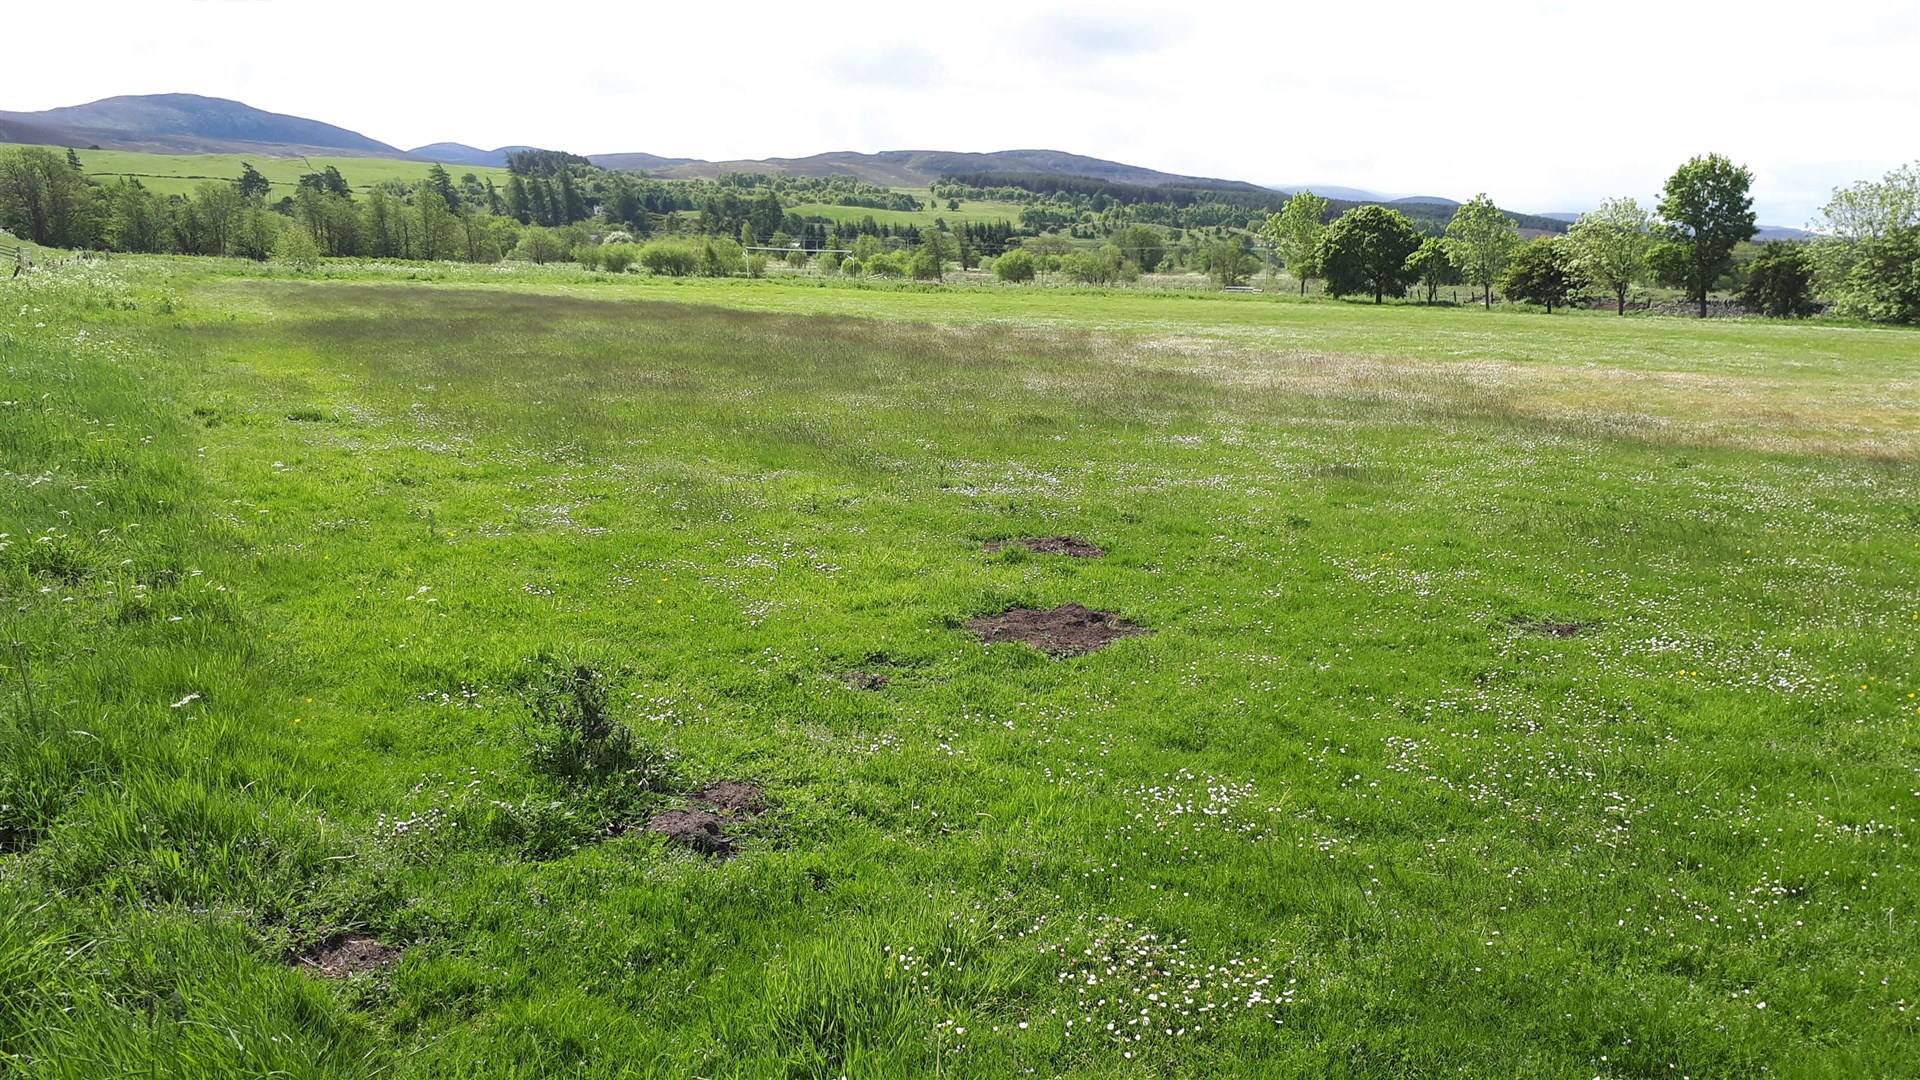 Kingussie Shinty Club has received sportscotland funding to develop the Market Stance playing fields. The venue is pictured before work started on improvements.